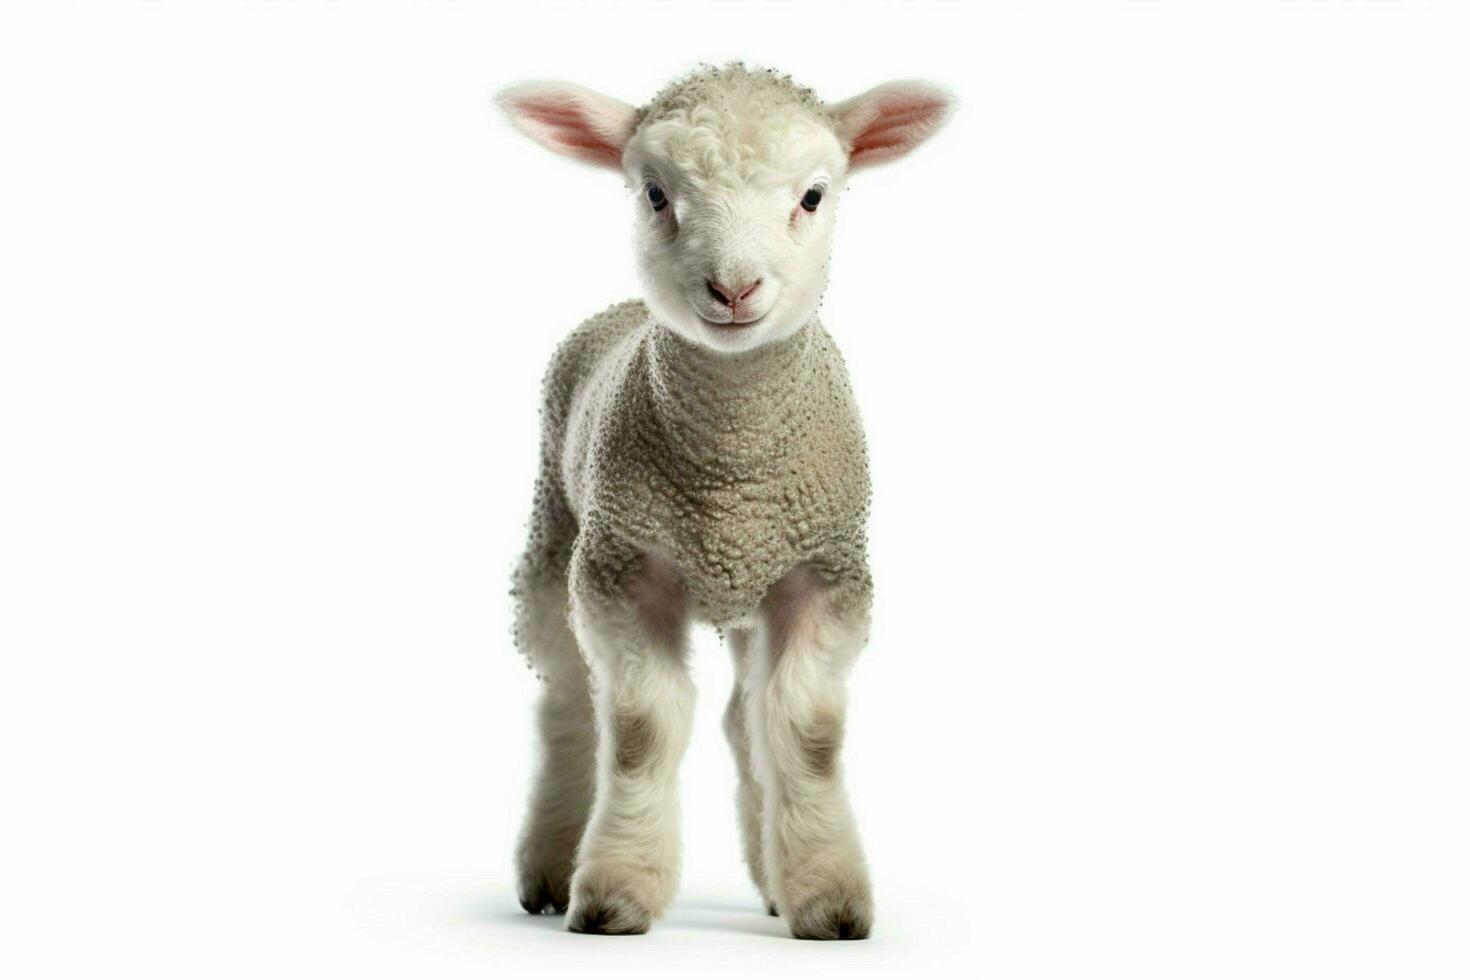 photo of Lamb with no background